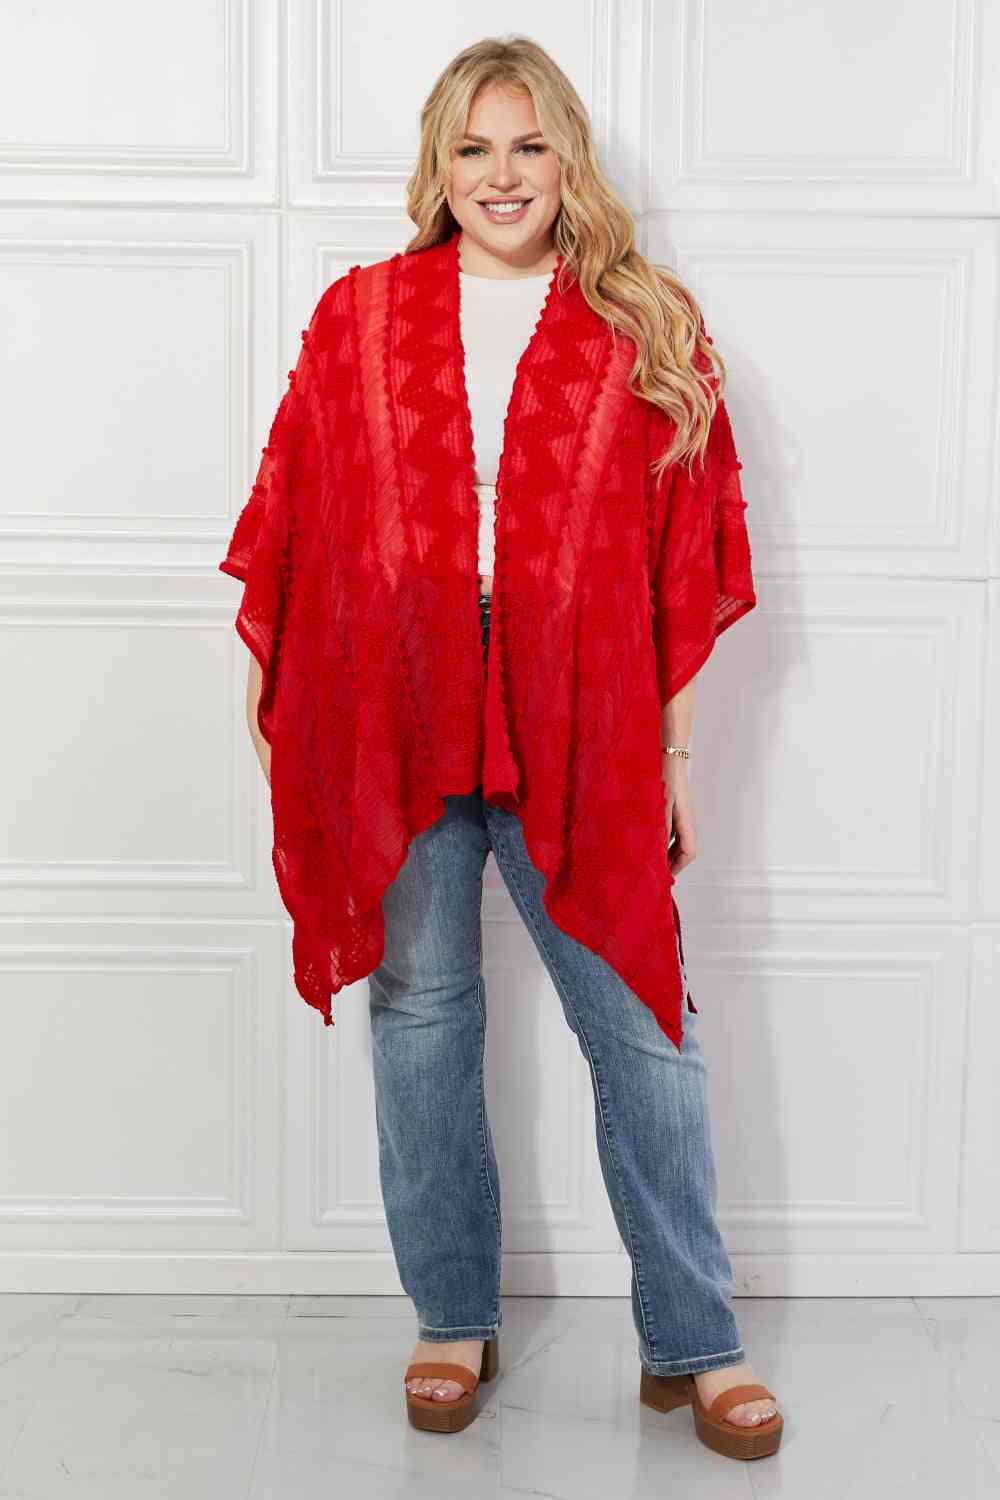 Pom-Pom Asymmetrical Poncho Cardigan in Red - Red / One Size - Women’s Clothing & Accessories - Outerwear - 5 - 2024